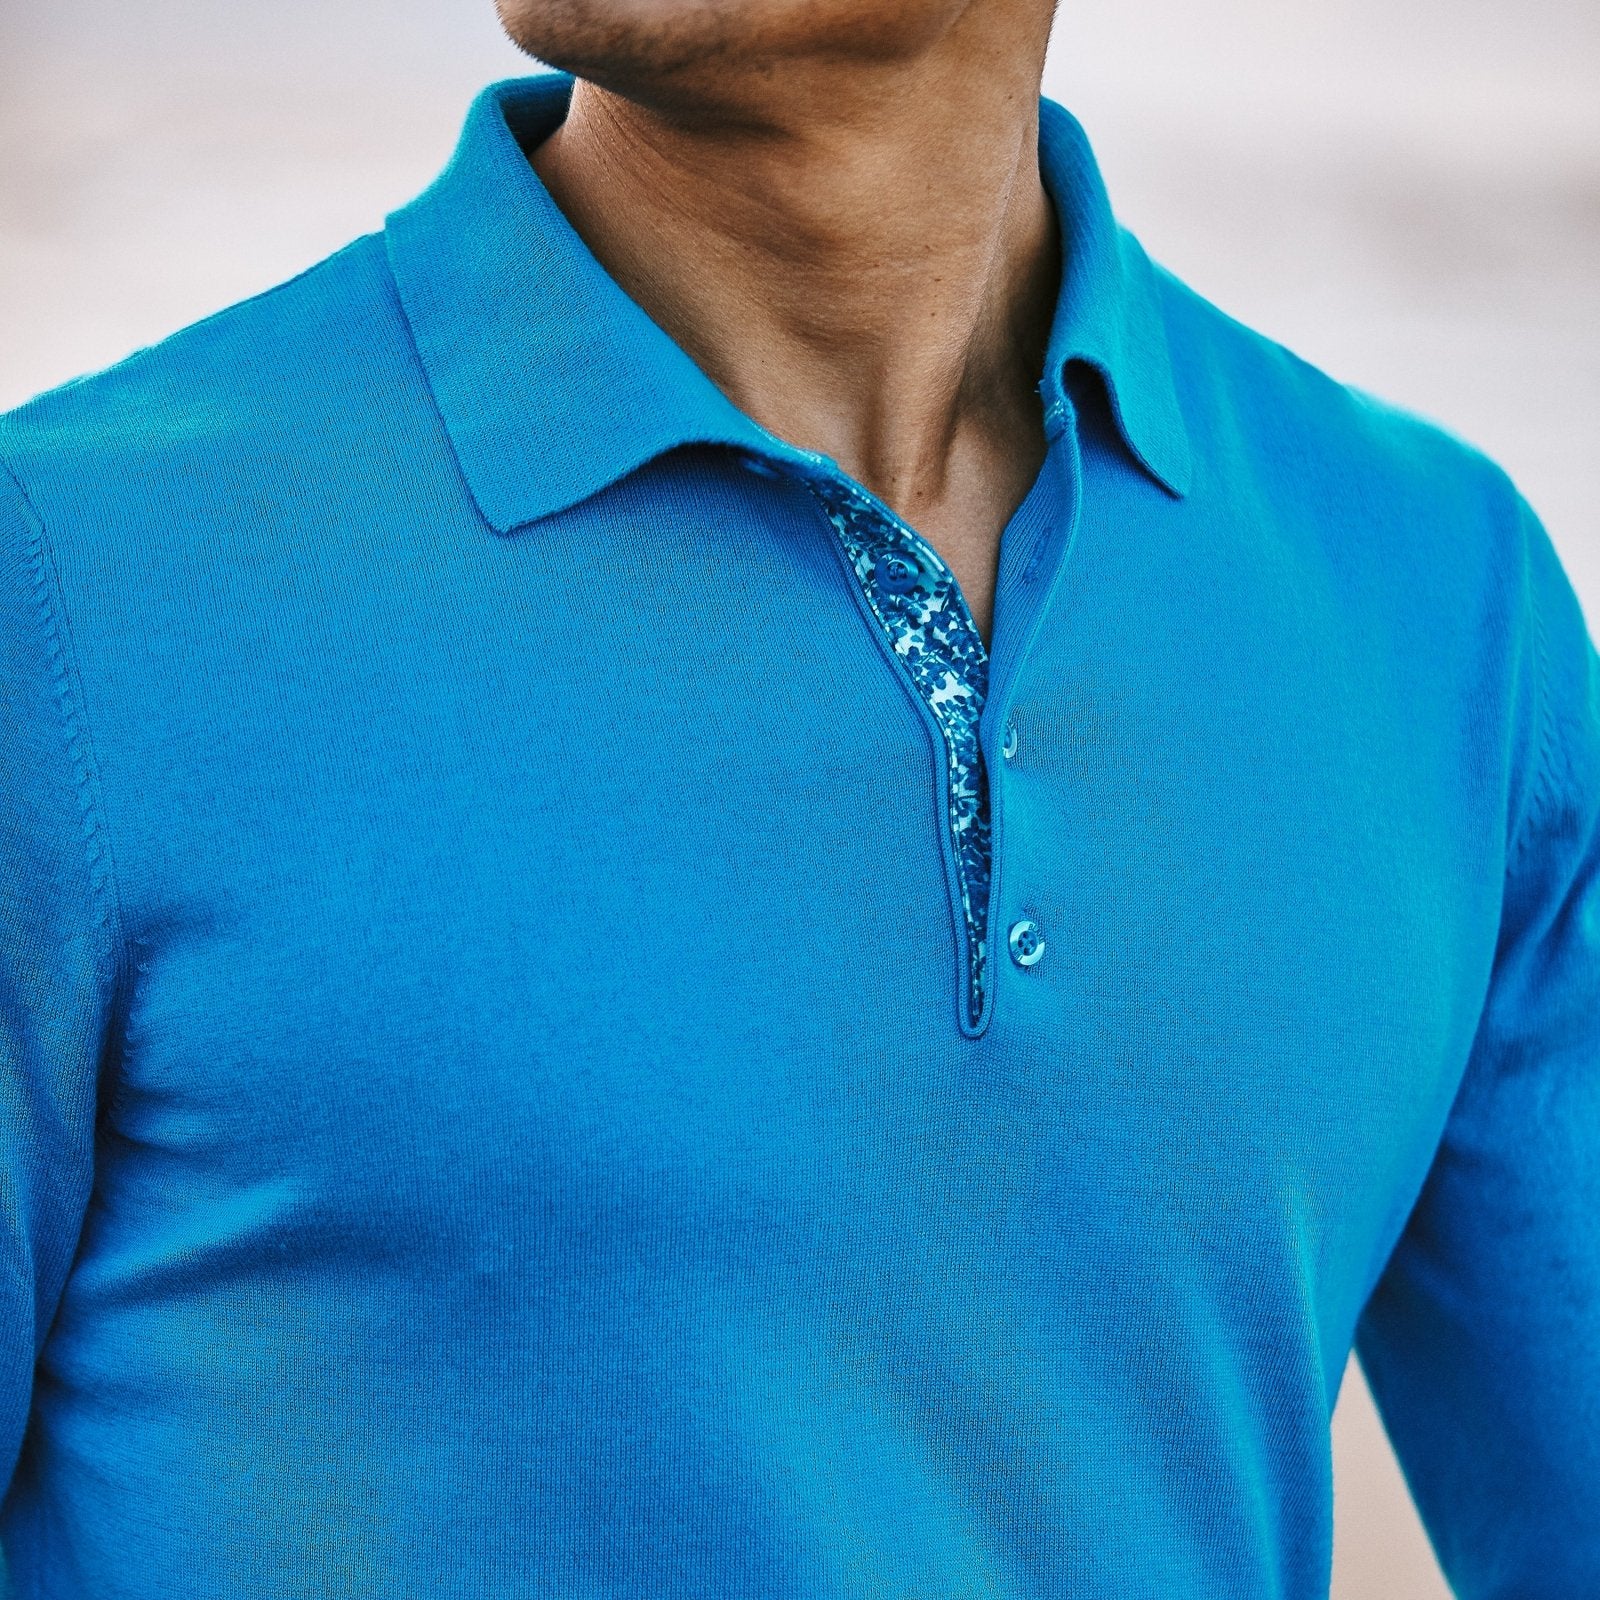 Blue Knit Polo with Blossom Accents - Blake Mill